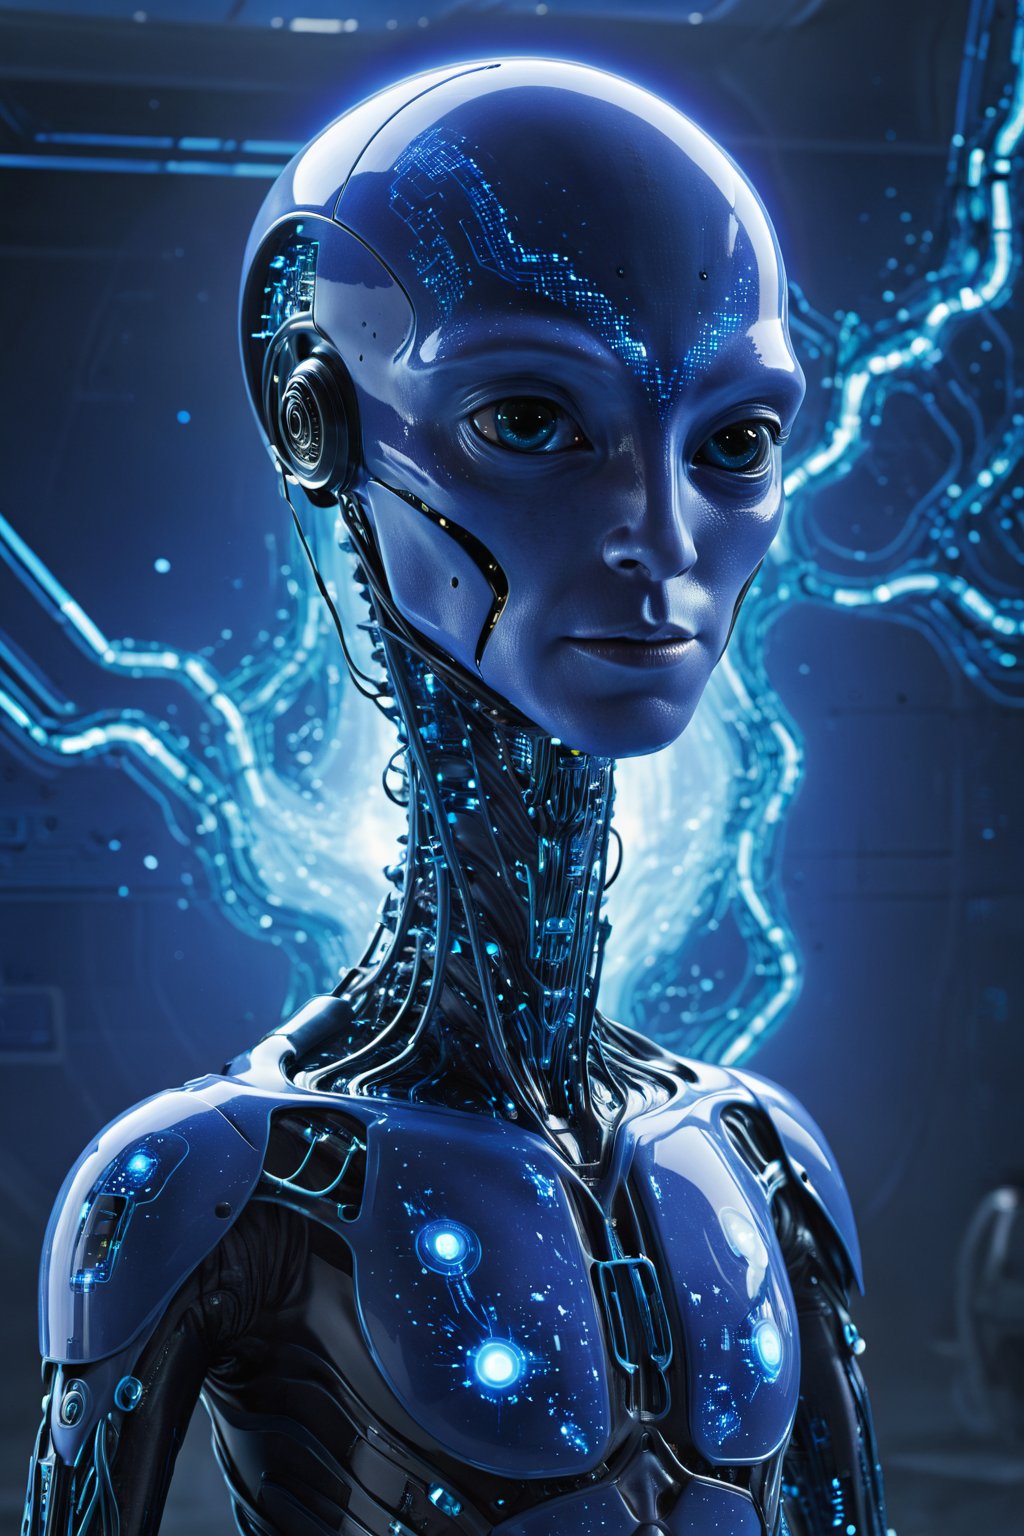 Create an image of Facebook as an alien entity, featuring a humanoid figure with a blue-themed exoskeleton, glowing circuitry patterns, and a face resembling the Facebook logo, set in a futuristic digital landscape